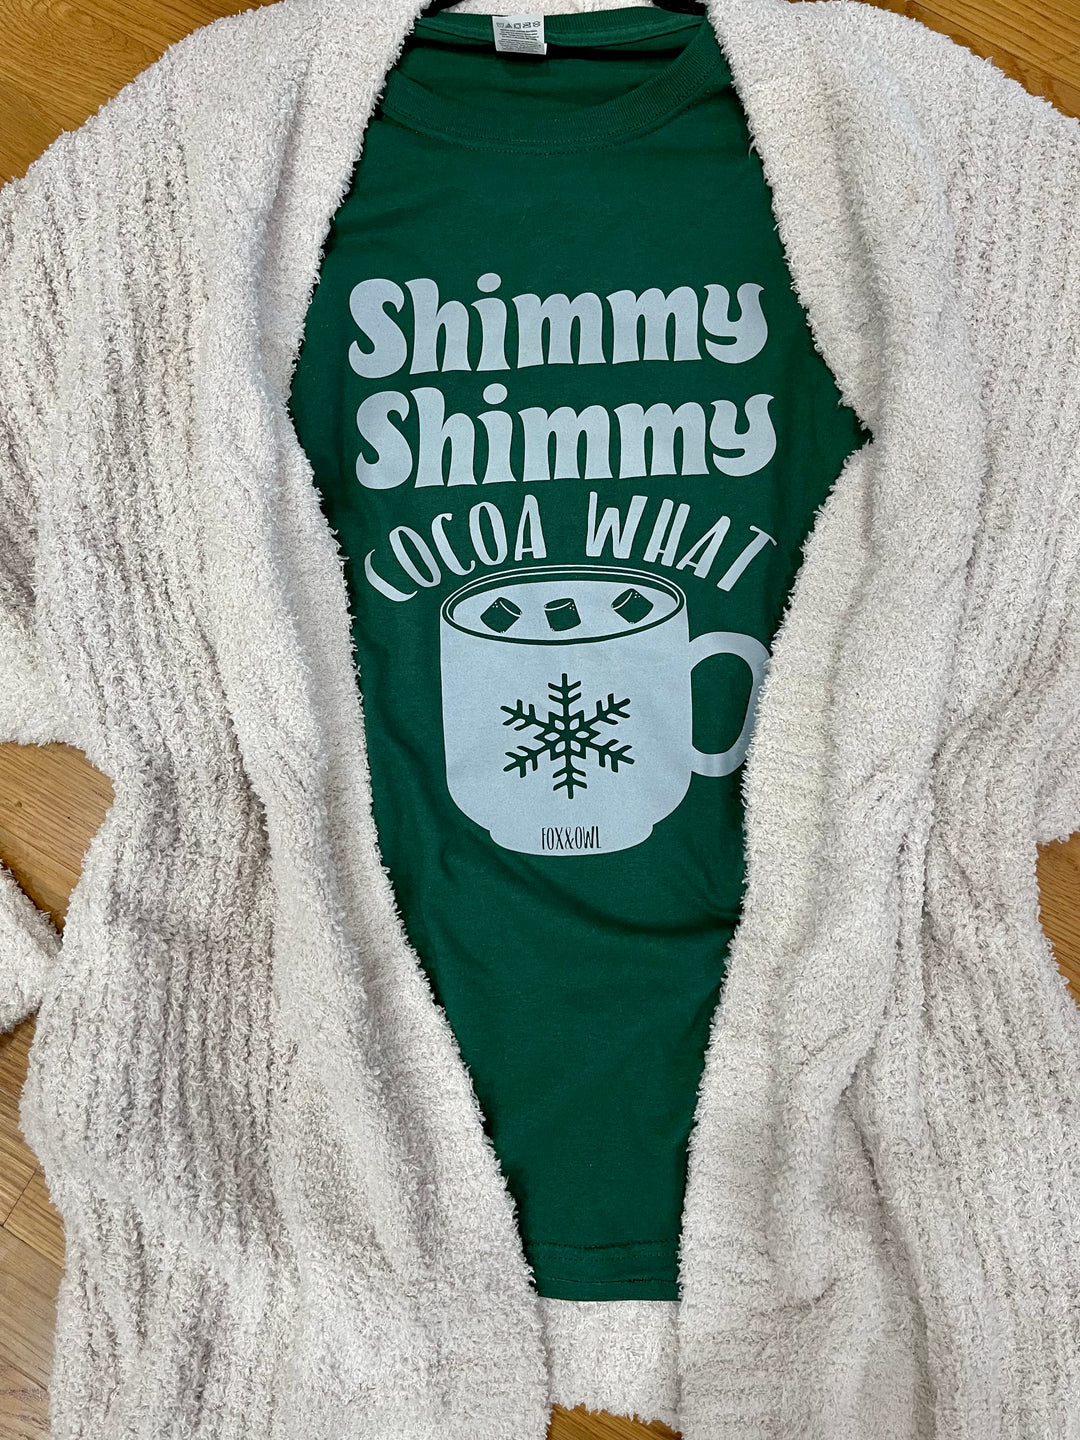 Shimmy shimmy Cocoa What- Long sleeve tee